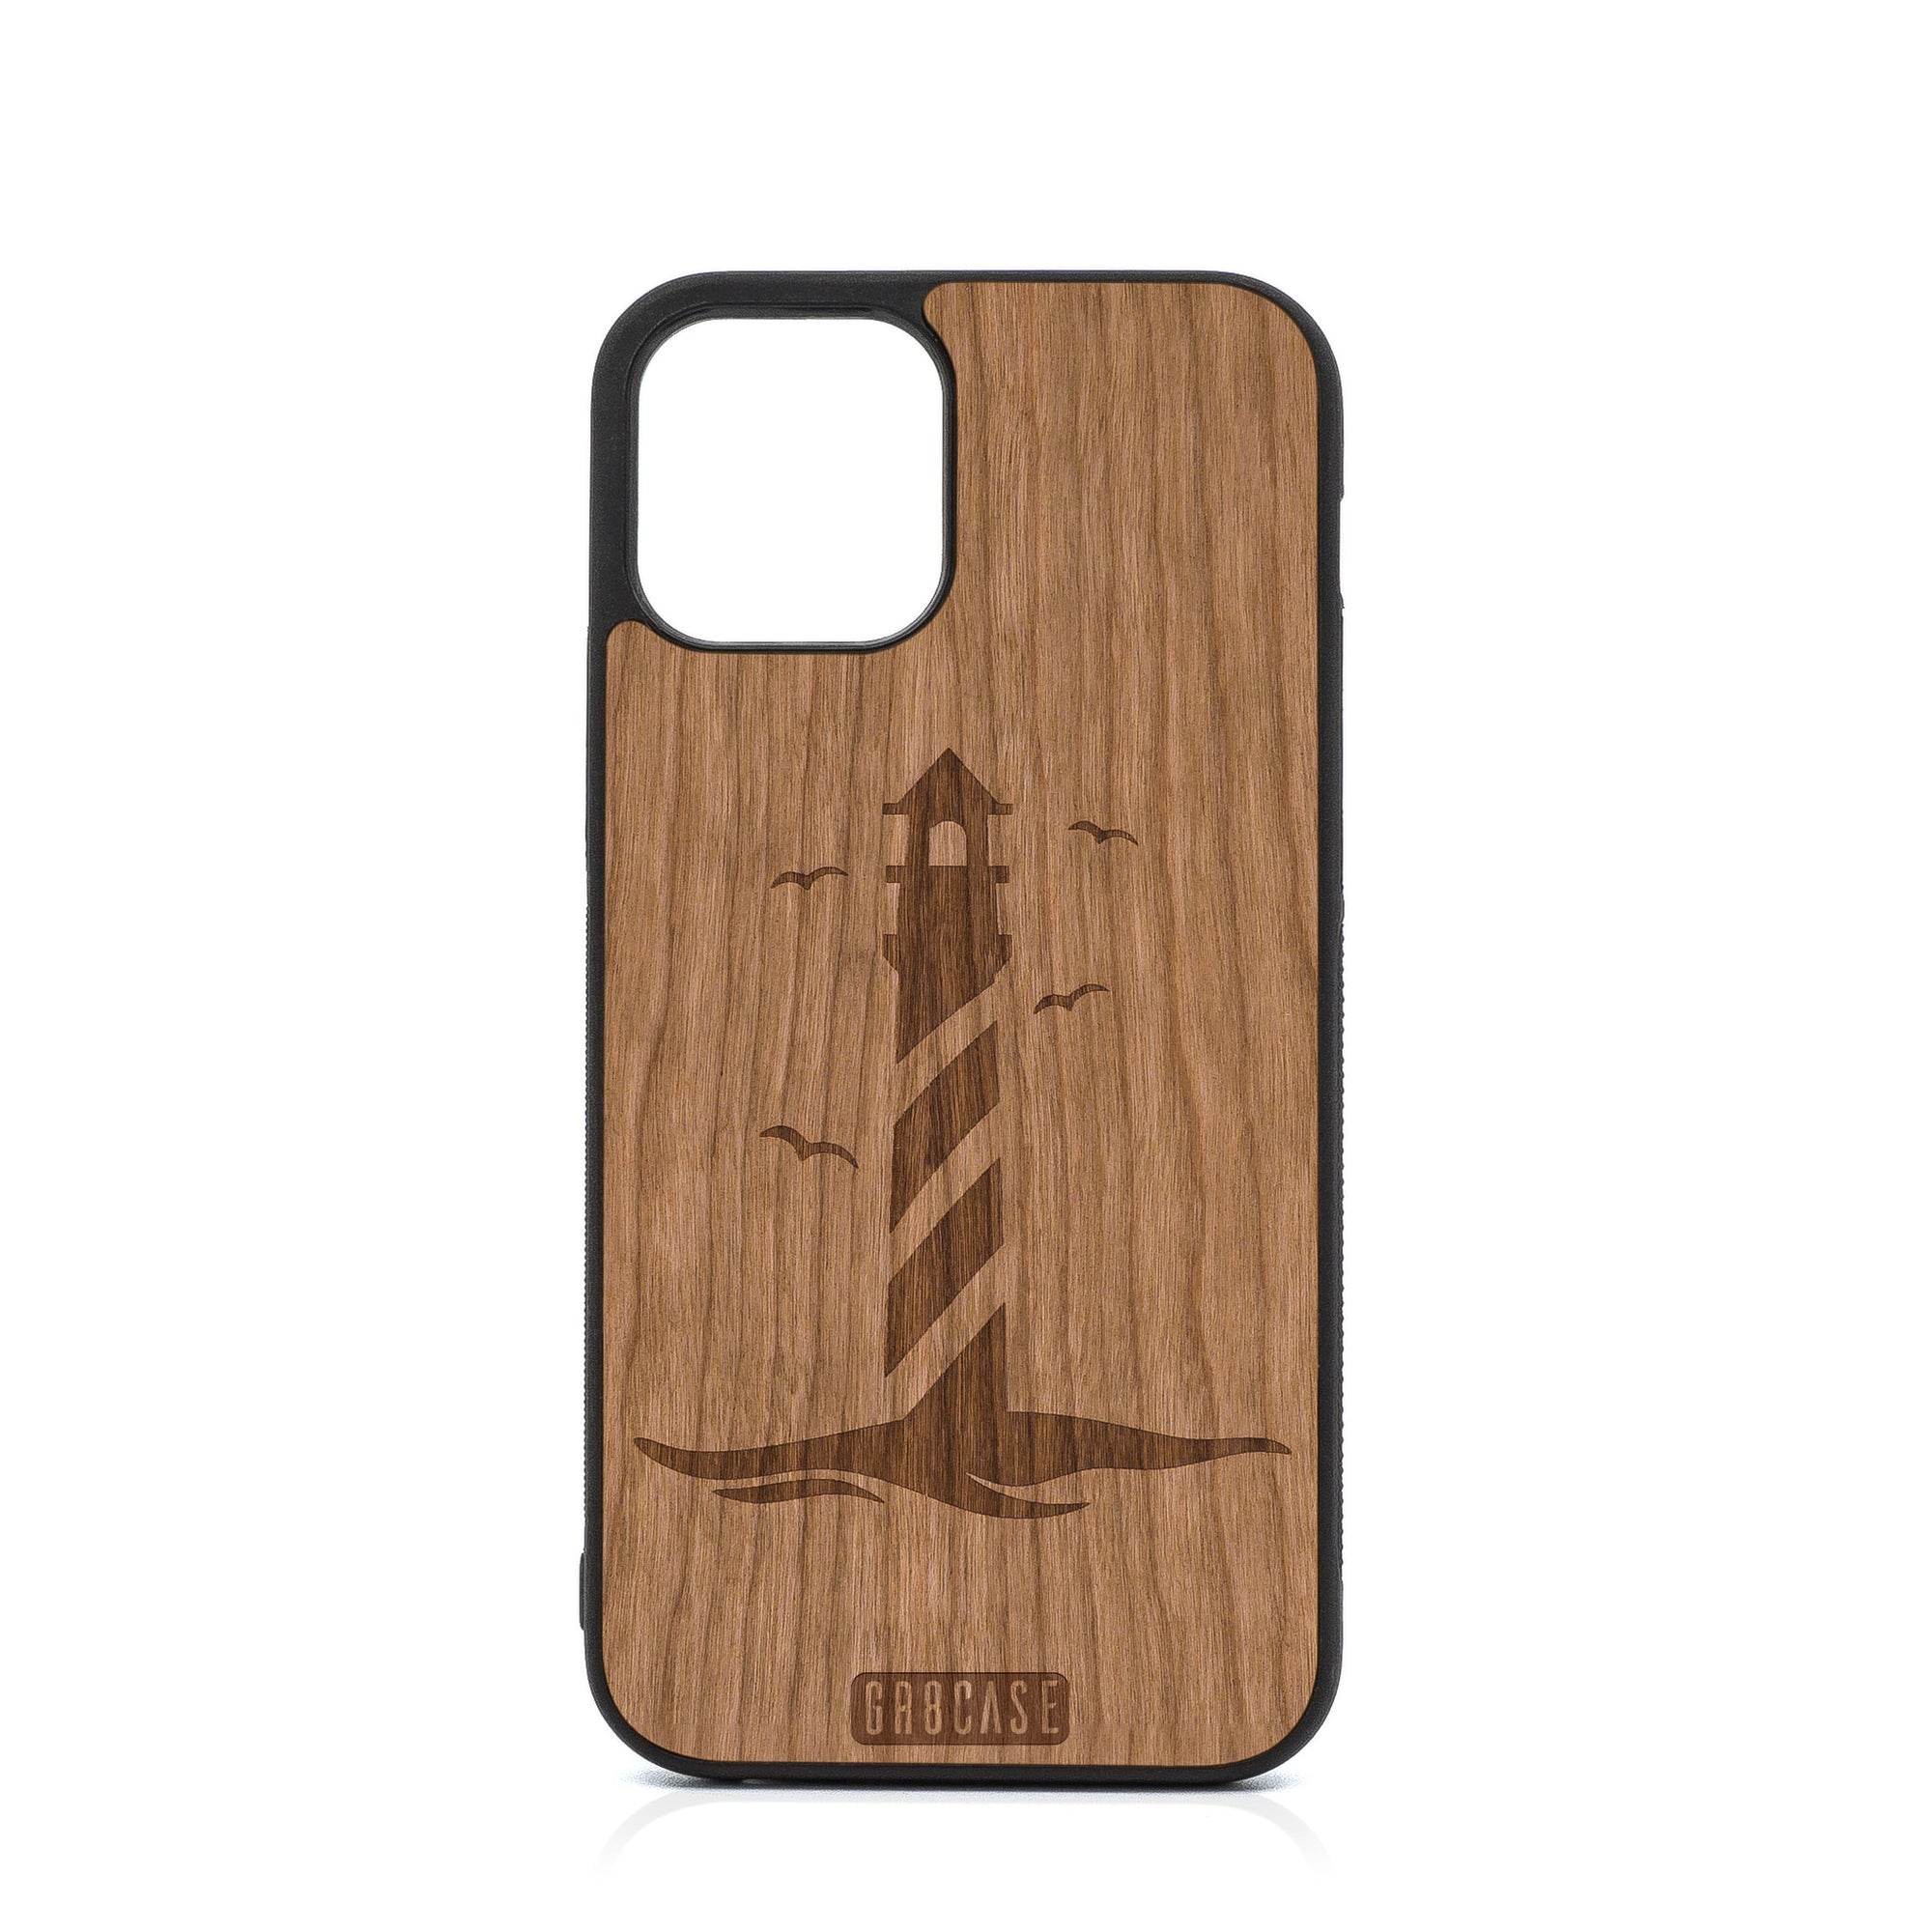 Lighthouse Design Wood Case For iPhone 12 Pro